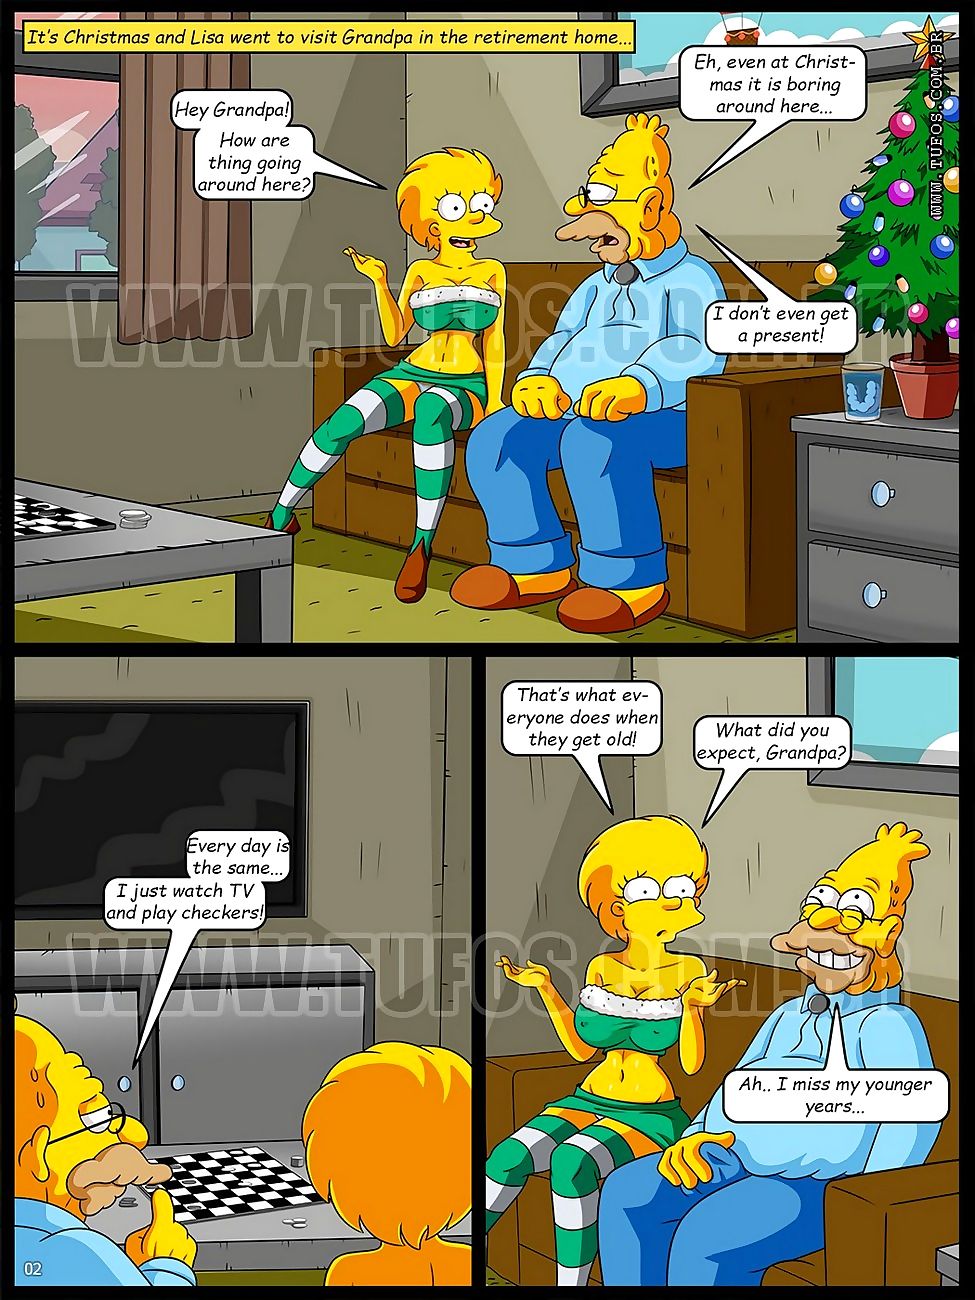 The Simpsons 10 - Christmas At The Retirâ€¦ page 1